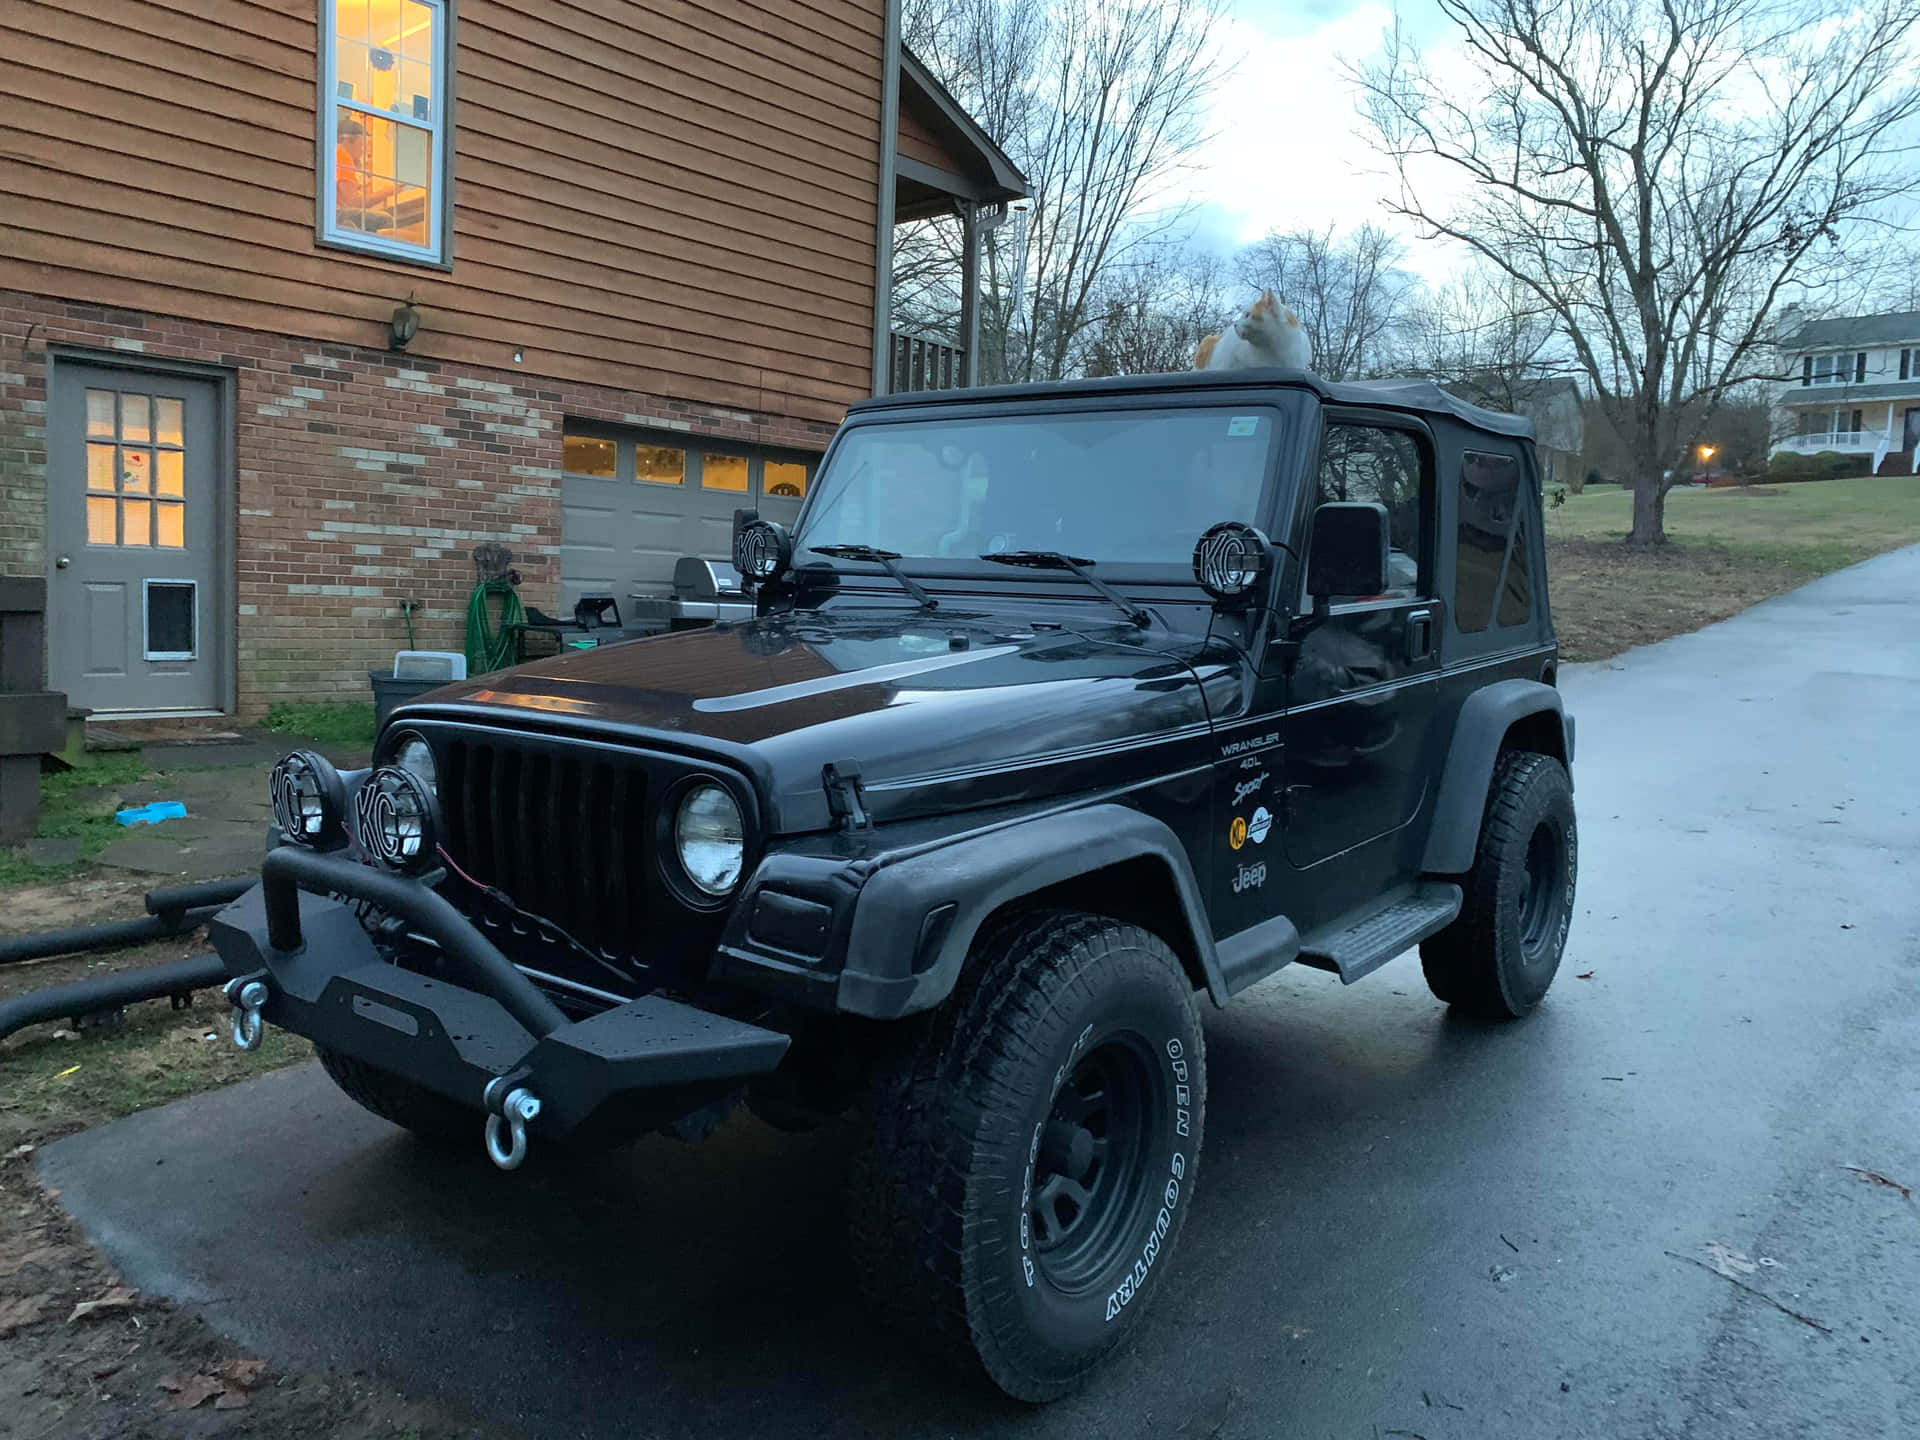 A Black Jeep Parked In Front Of A House